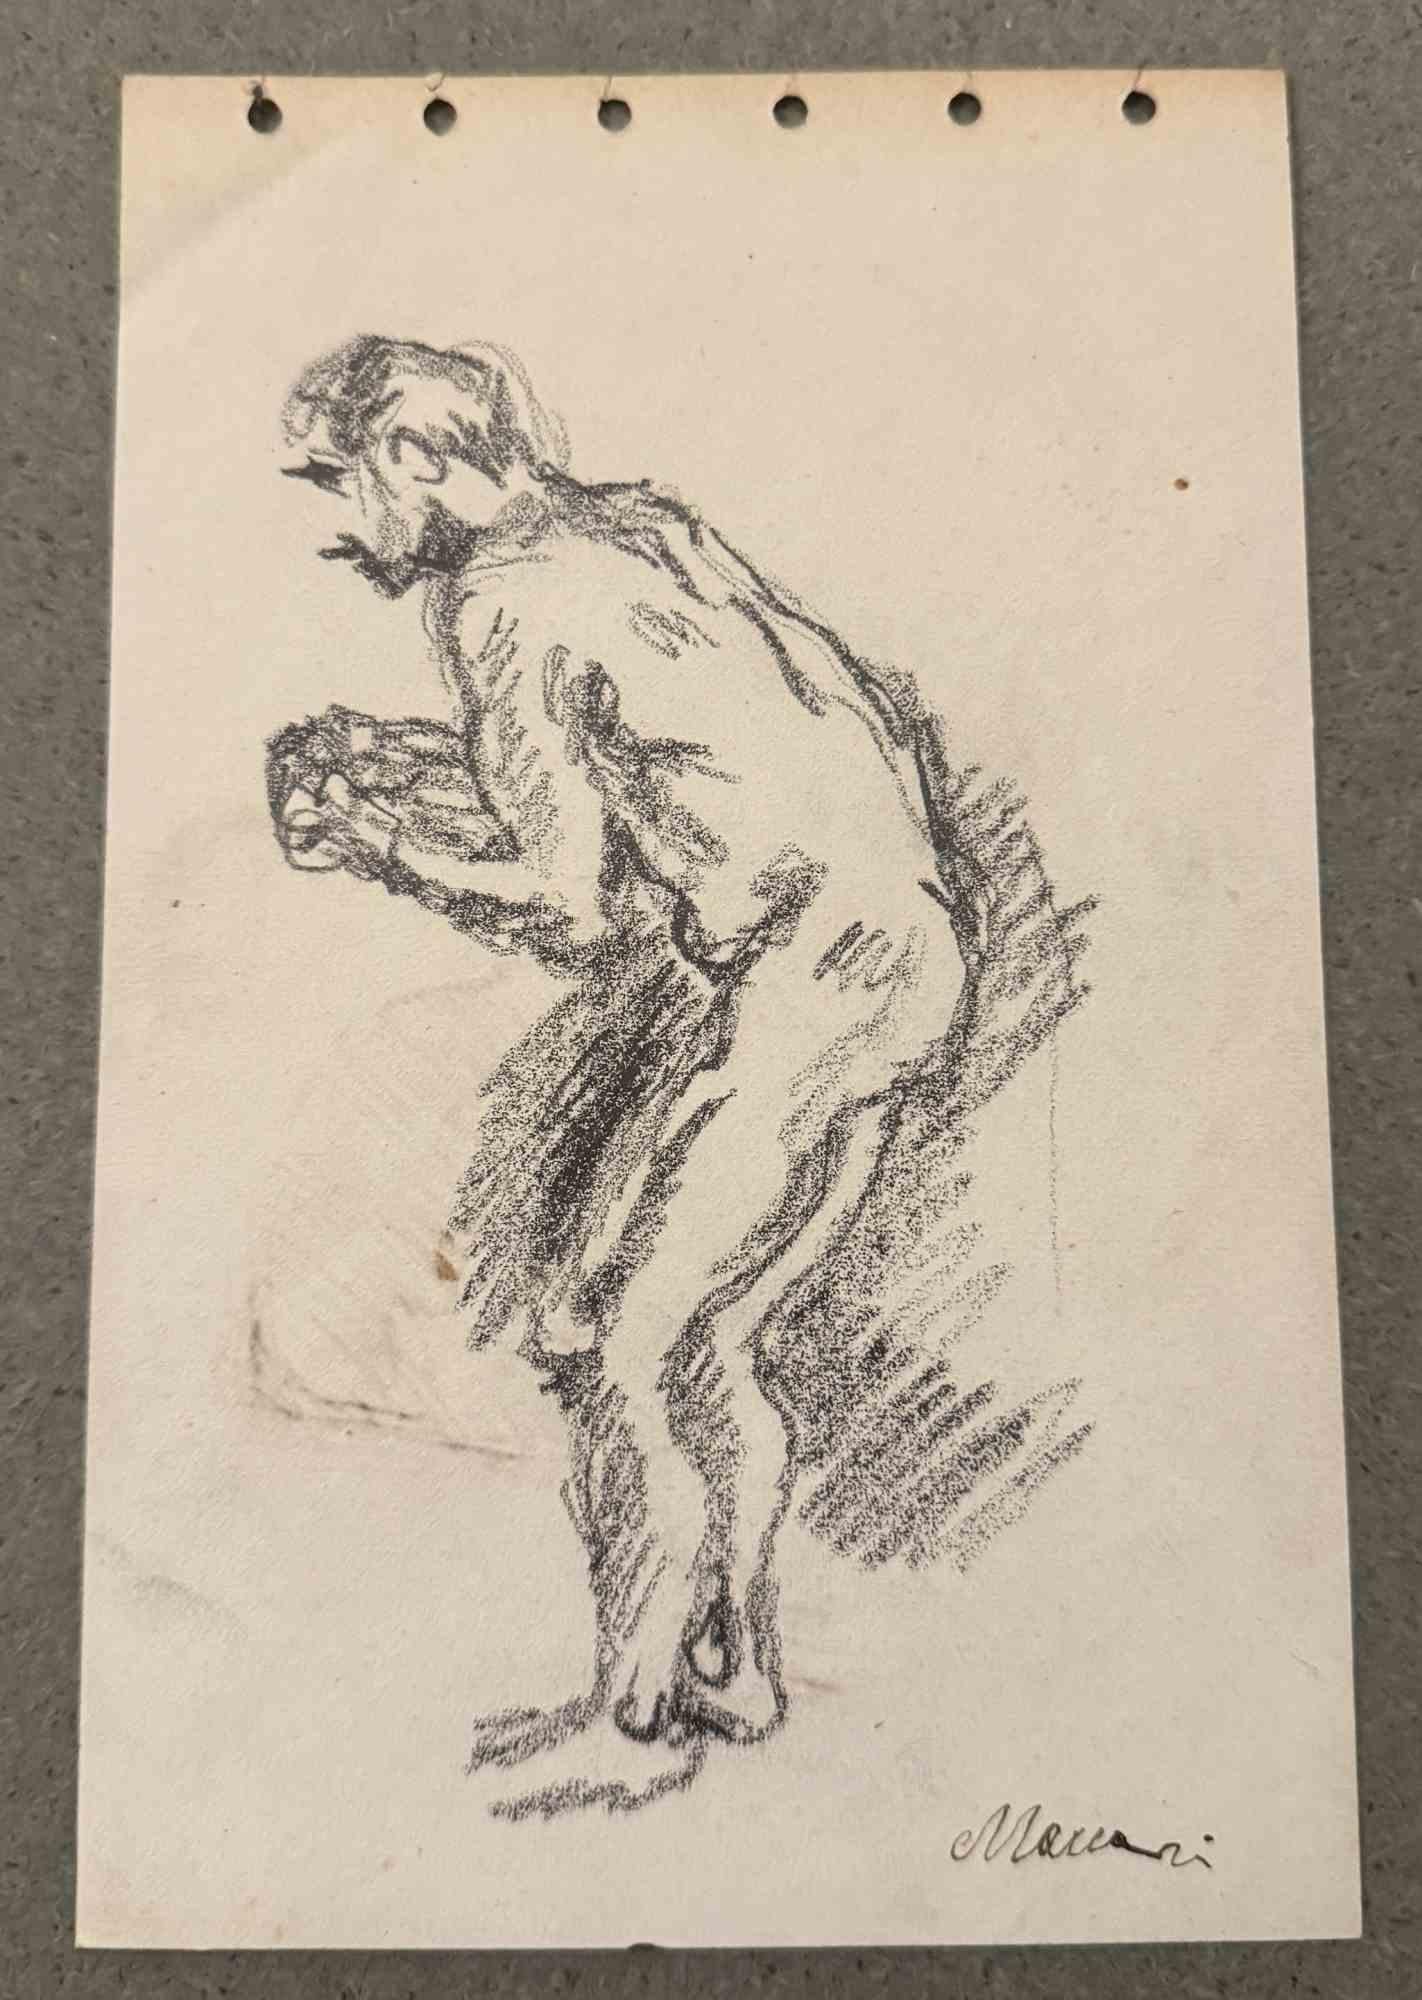 Nude is a charcoal drawing realized by Mino Maccari  (1924-1989) in the Mid-20th Century.

Hand-signed.

Good conditions with slight foxing.

Mino Maccari (Siena, 1924-Rome, June 16, 1989) was an Italian writer, painter, engraver and journalist,